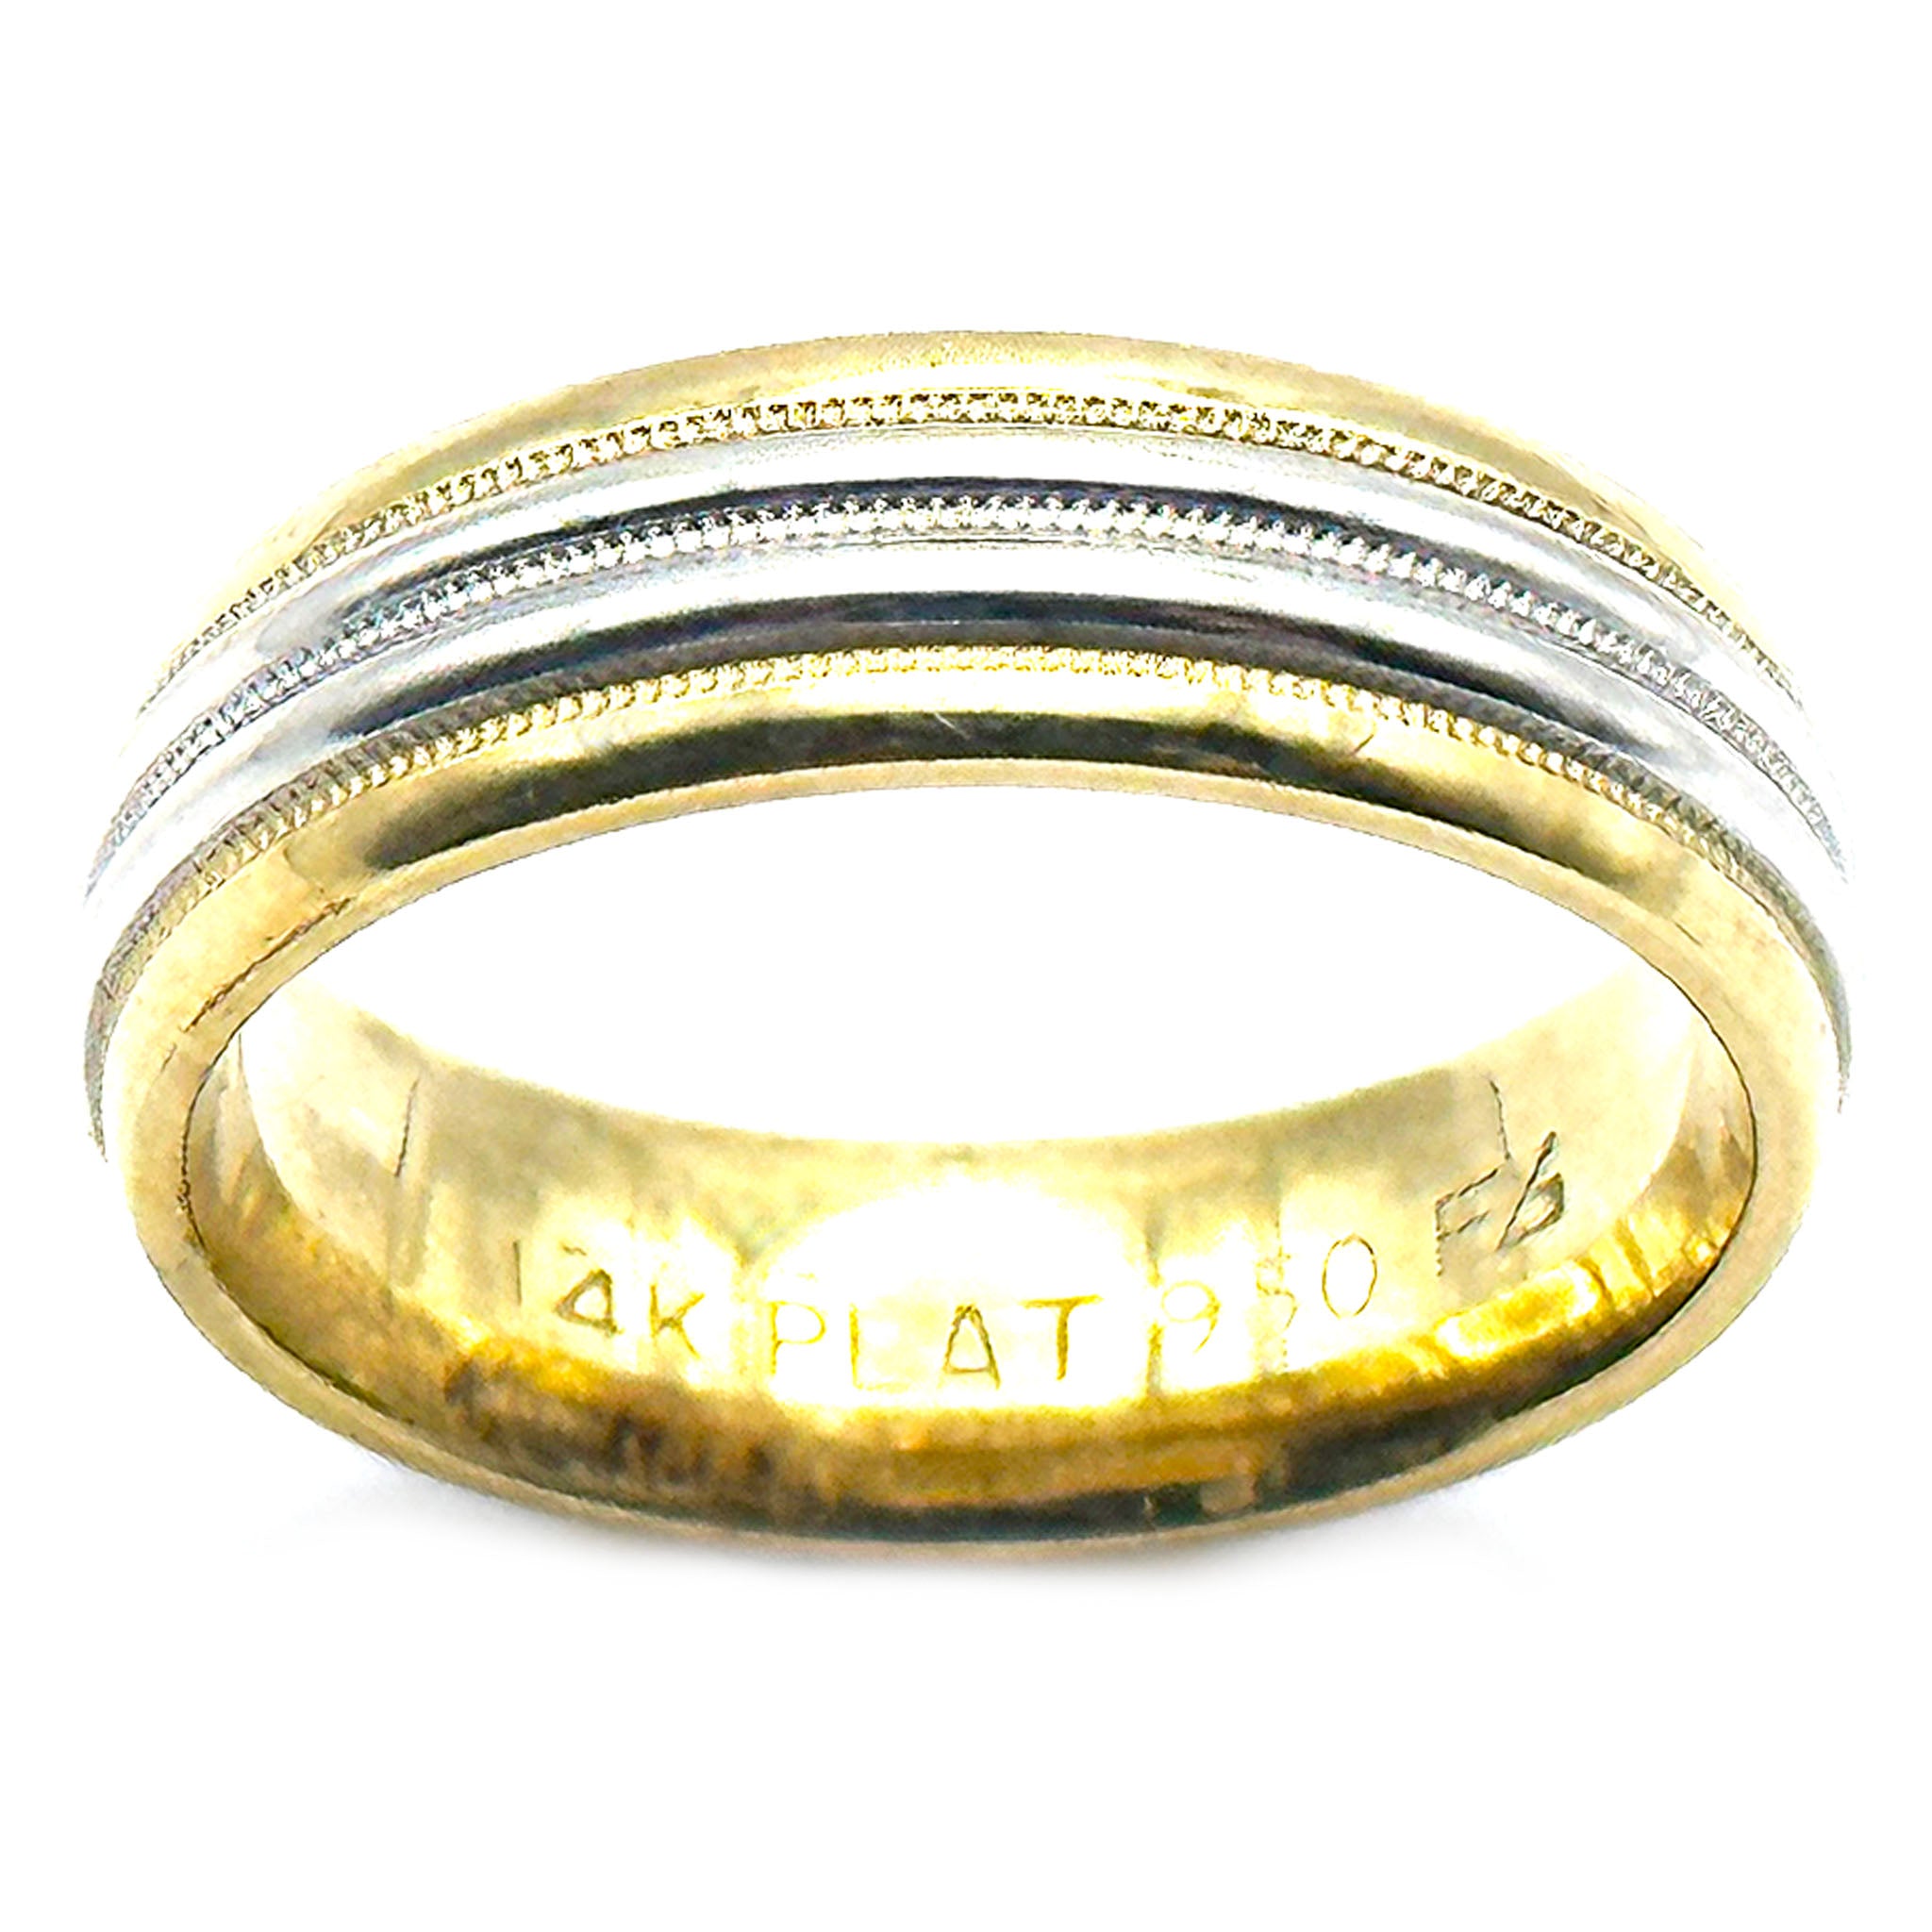 $3600 14Kt Yellow Gold and Platinum 5mm Men's Wedding Band